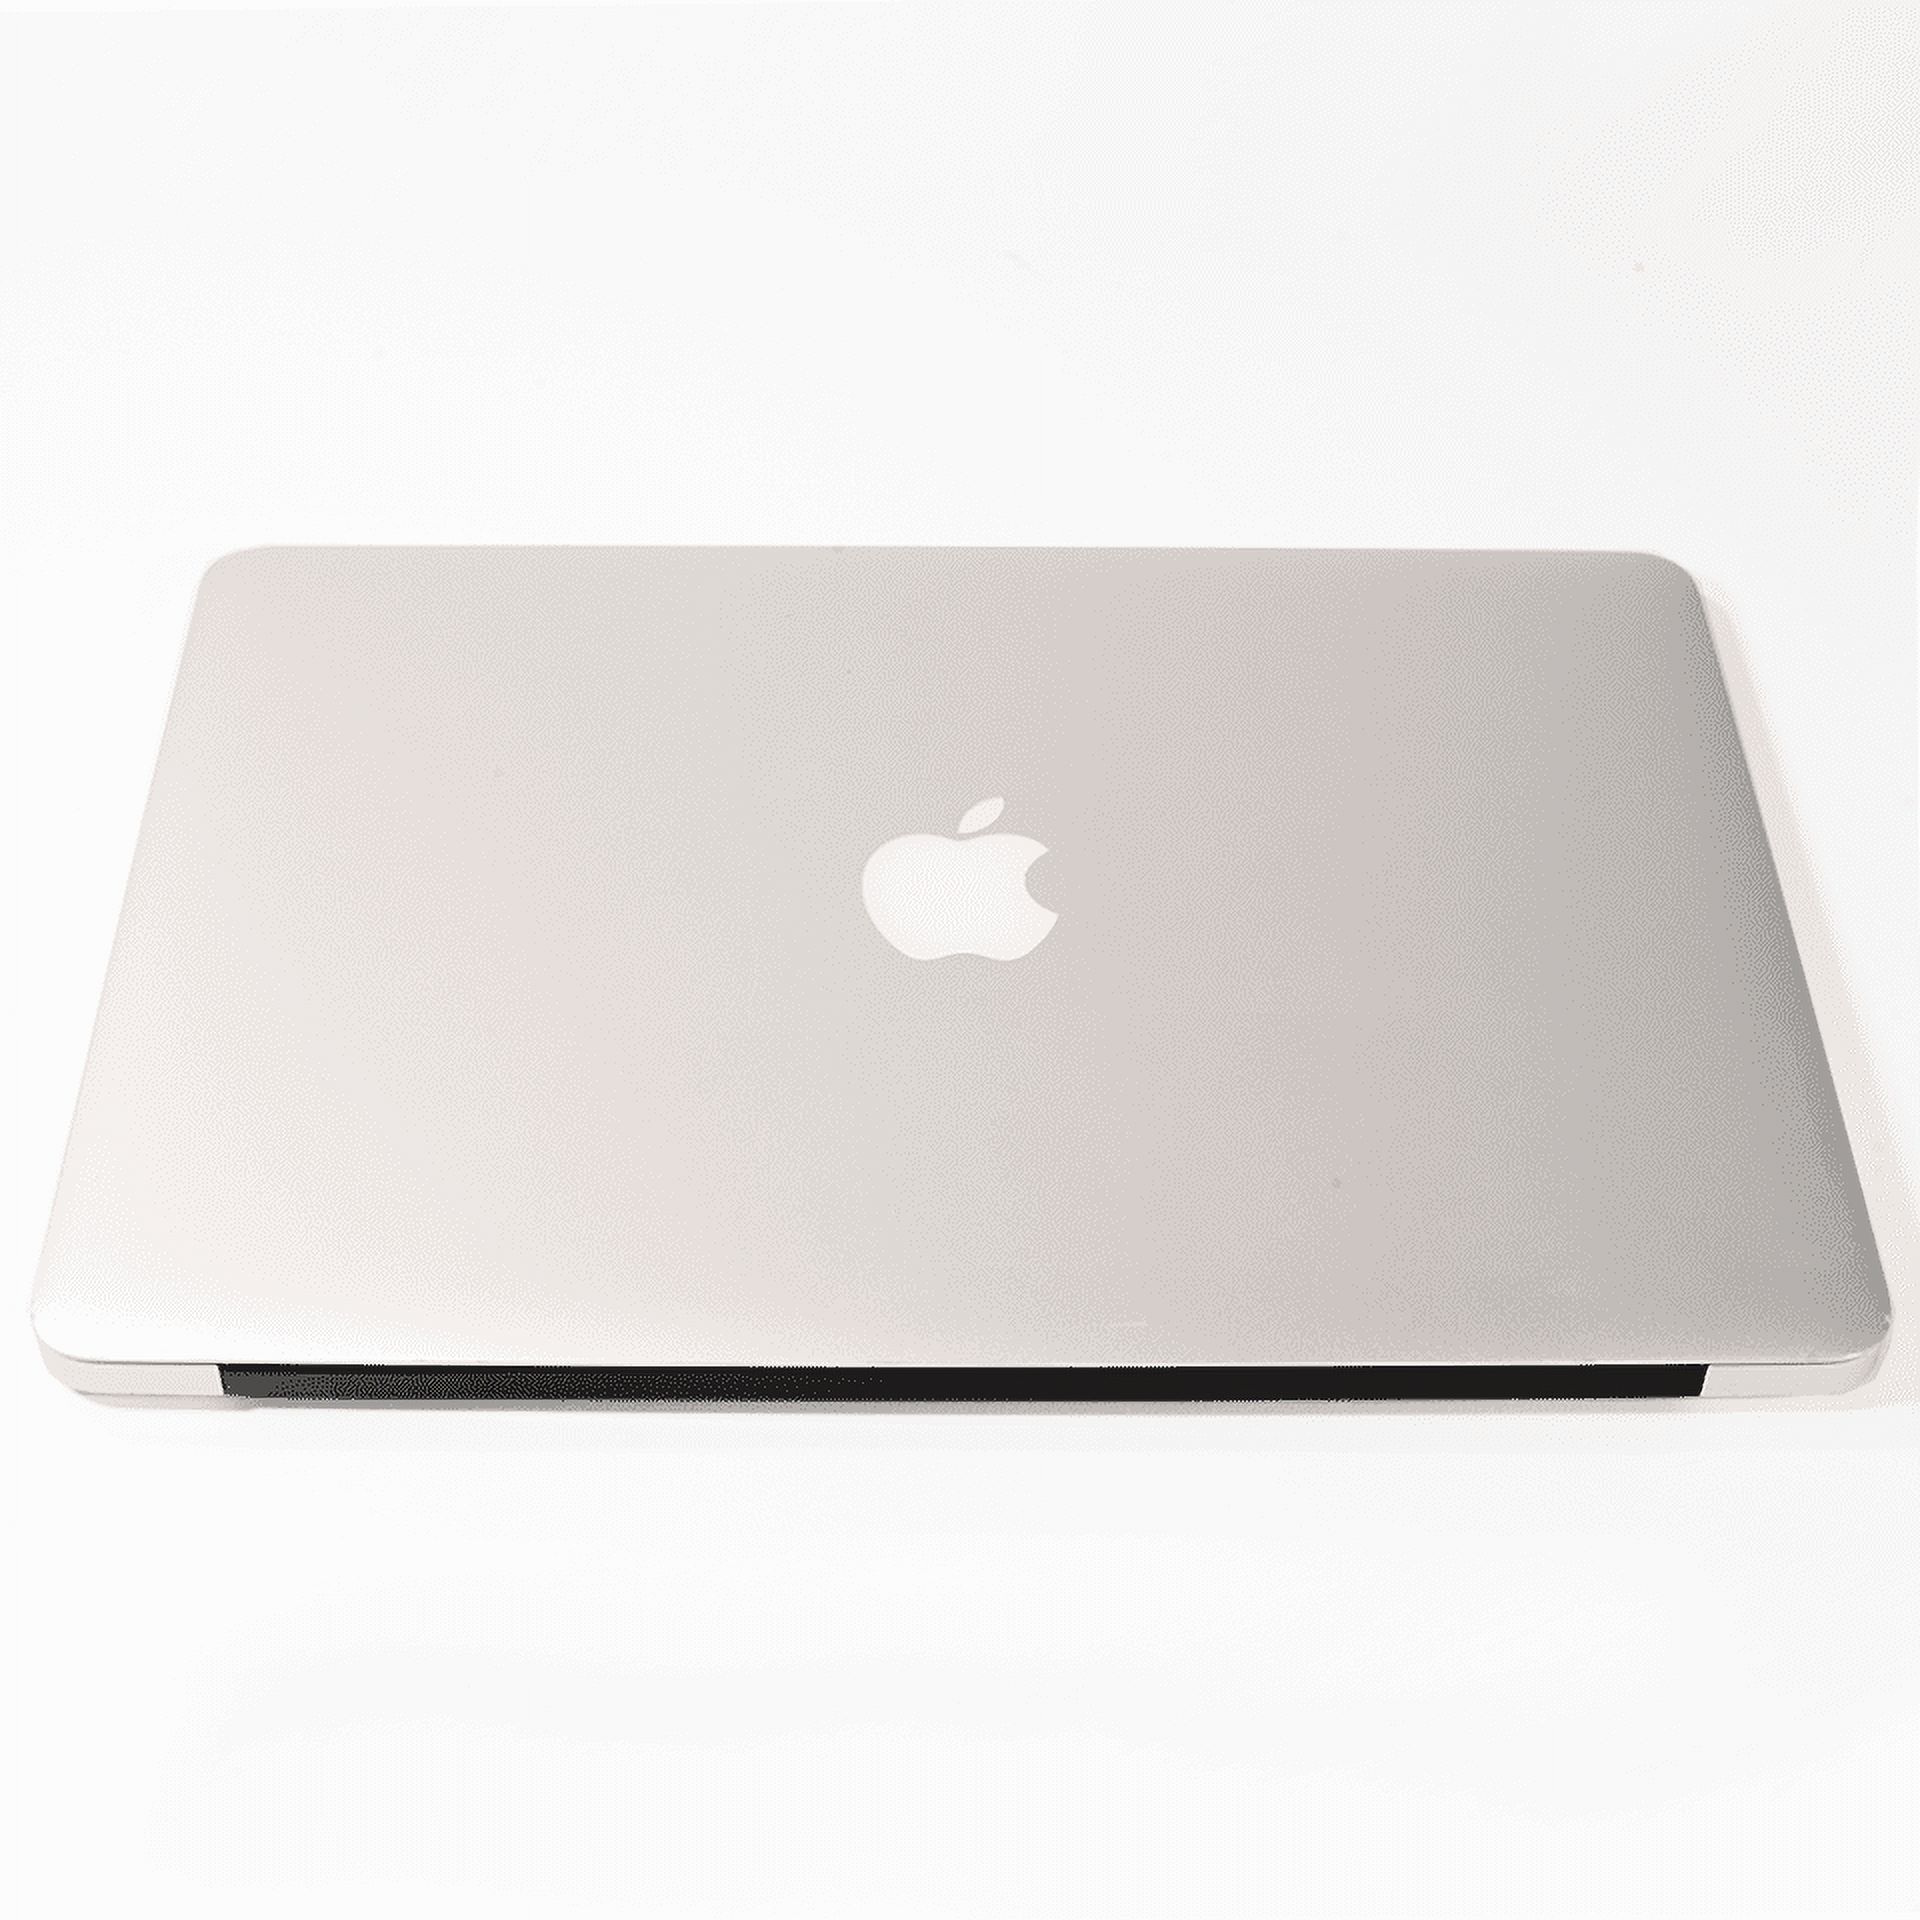 Used 13" Apple MacBook Air 1.7GHz Dual Core i7 8GB Memory / 256GB SSD (Turbo Boost to 3.3GHz) () - image 4 of 7